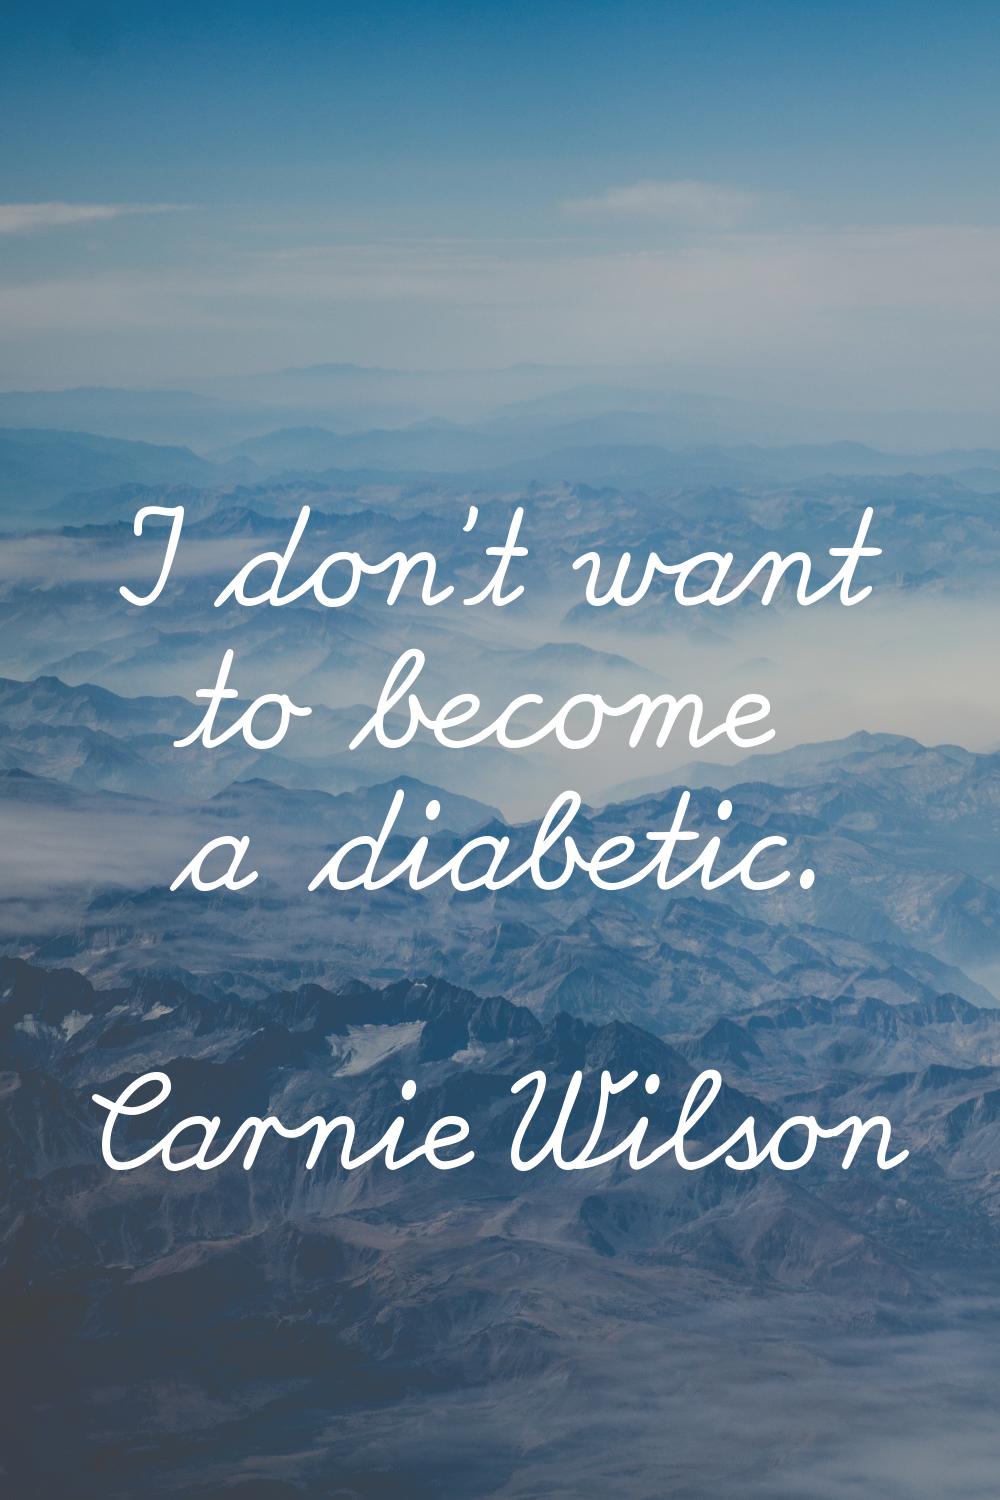 I don't want to become a diabetic.